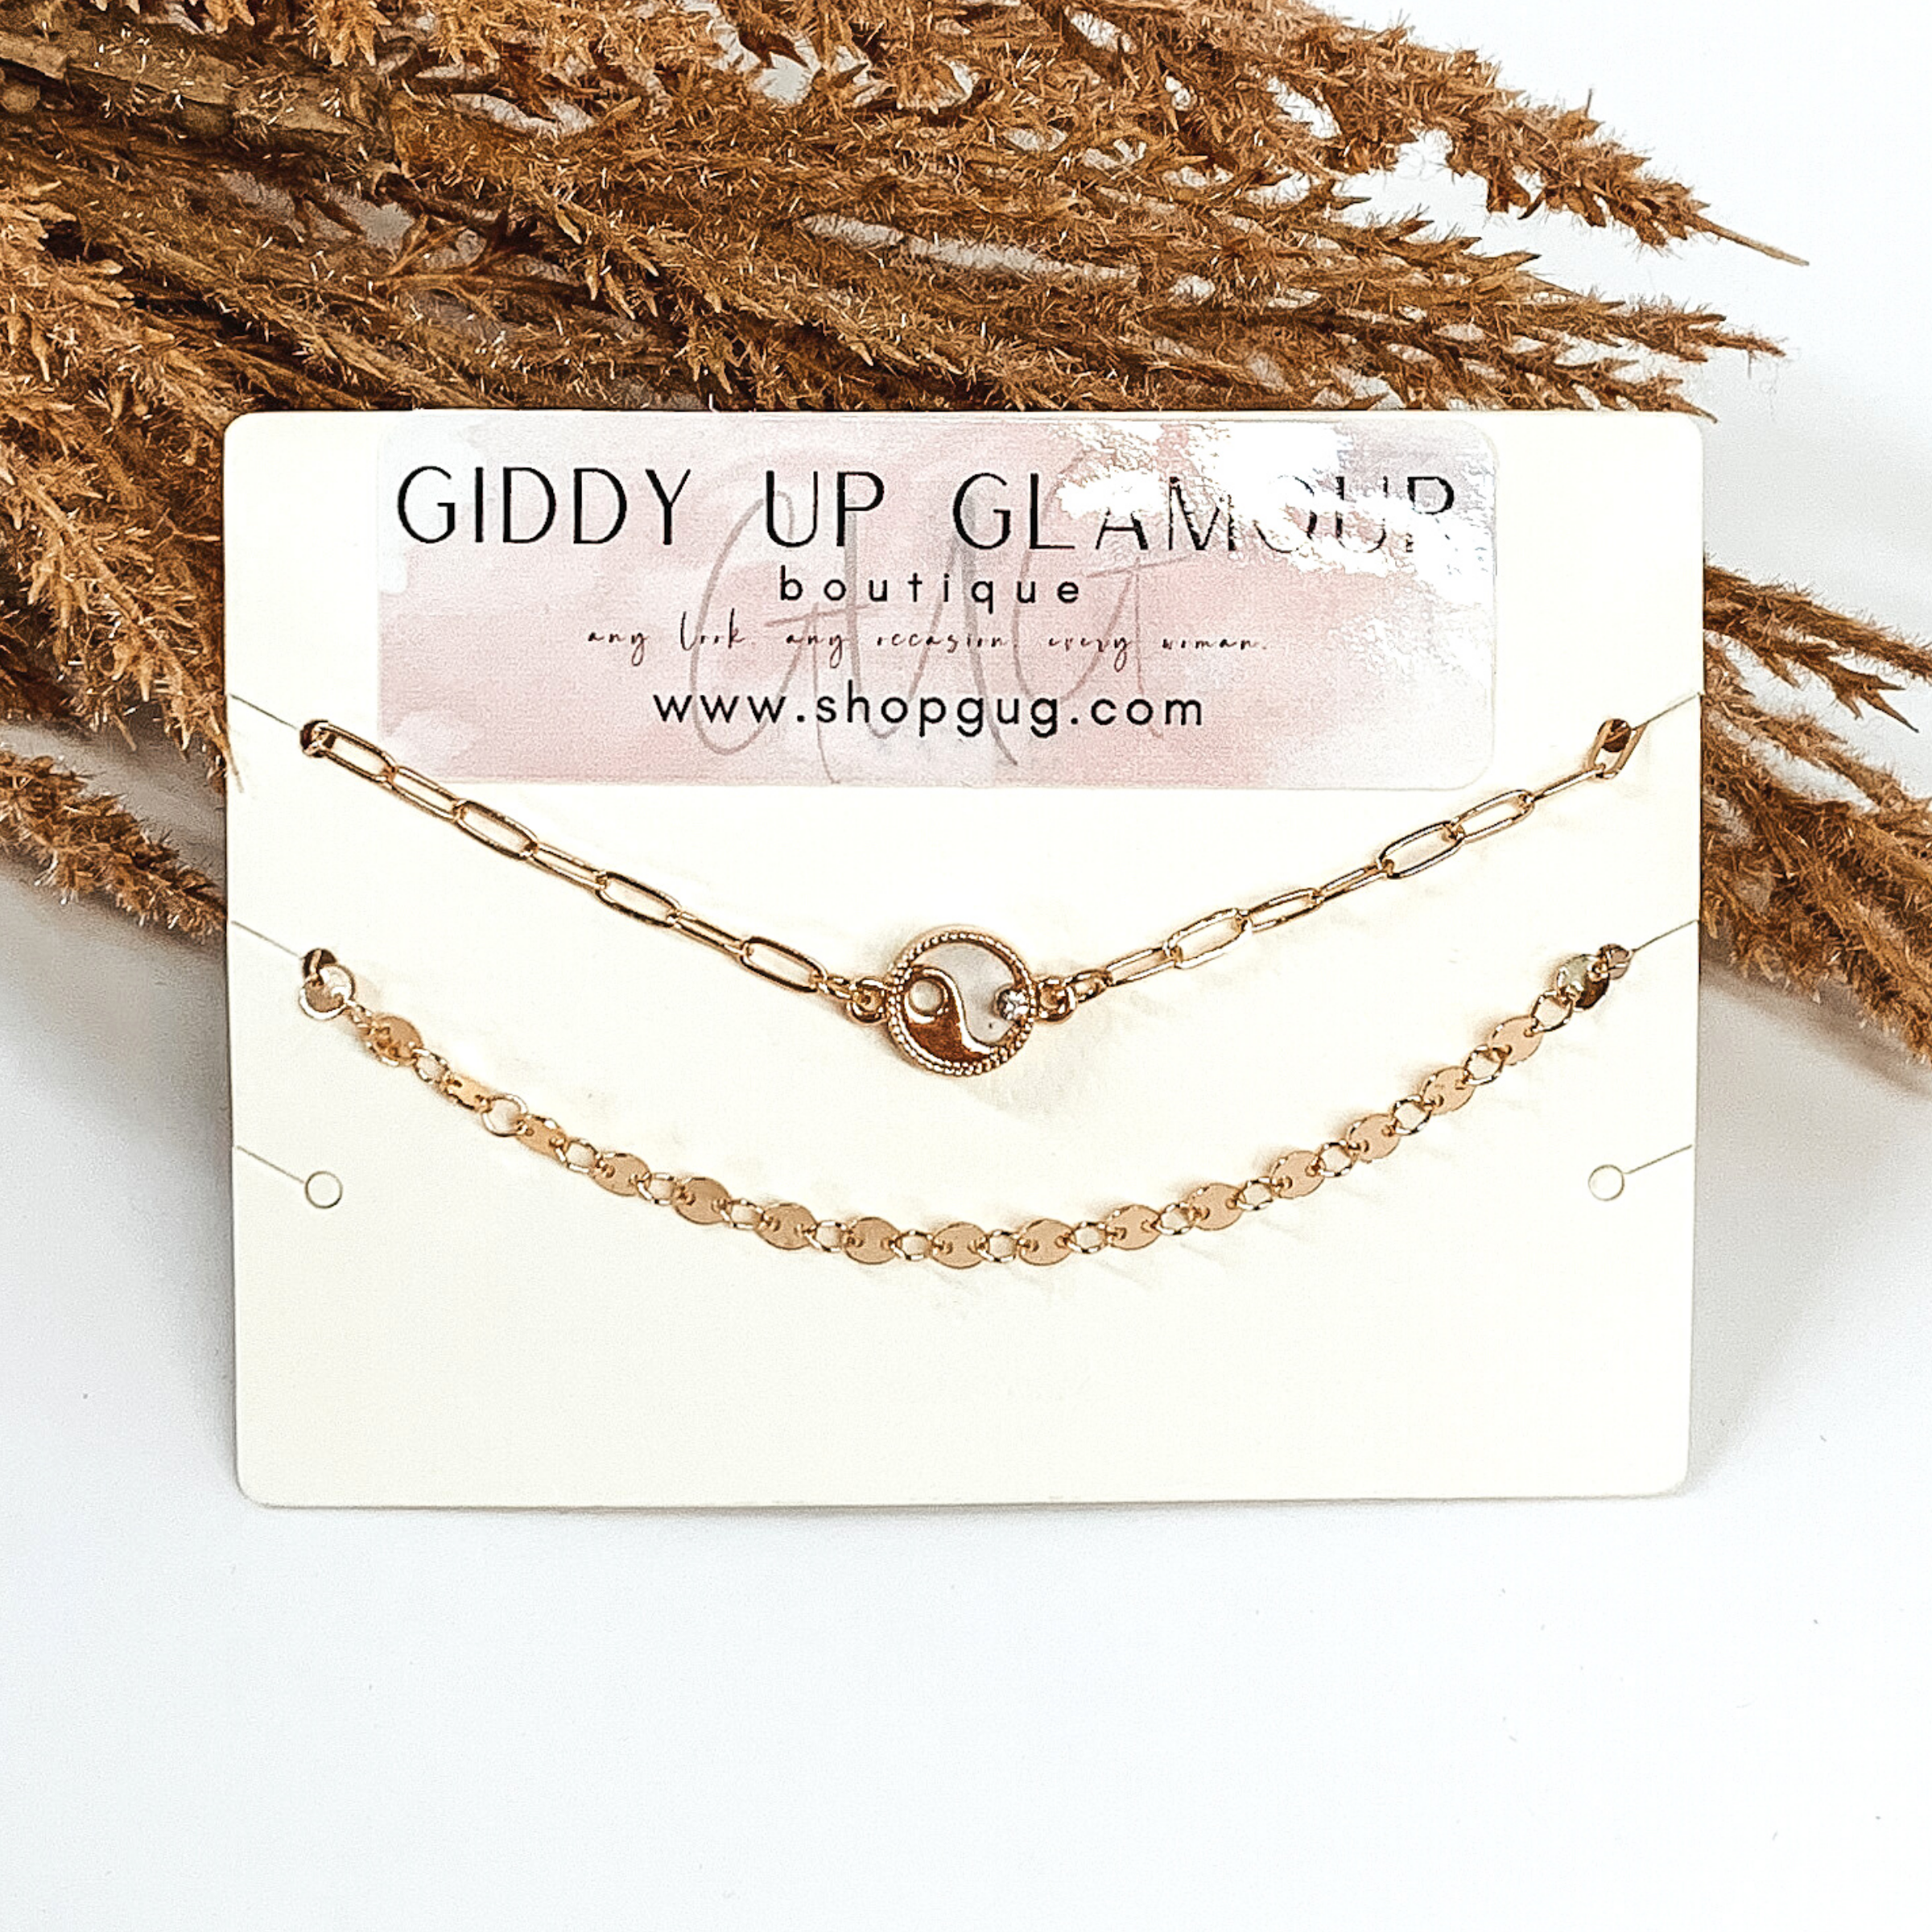 Two gold chained anklets. One is plain, while the second one has a yin-yang charm. They are pictured on a a white background that has some brown floral. 